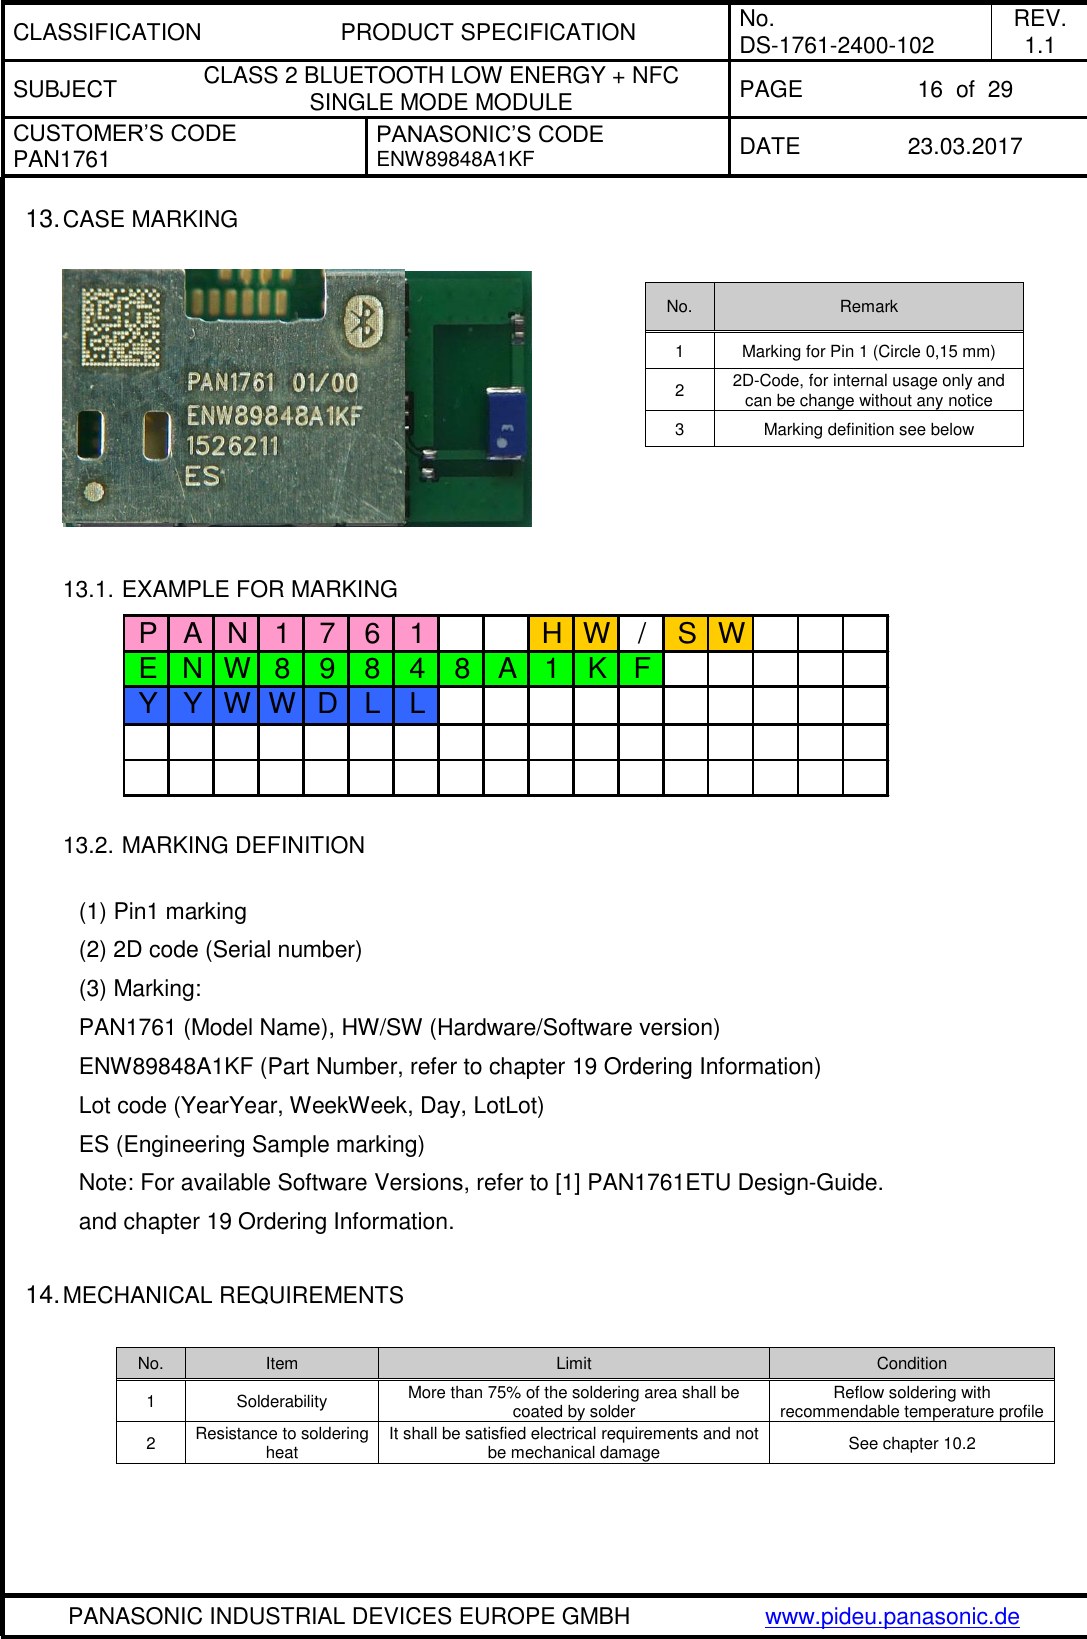 CLASSIFICATION PRODUCT SPECIFICATION No. DS-1761-2400-102 REV. 1.1 SUBJECT CLASS 2 BLUETOOTH LOW ENERGY + NFC SINGLE MODE MODULE PAGE 16  of  29 CUSTOMER’S CODE PAN1761 PANASONIC’S CODE ENW89848A1KF  DATE 23.03.2017   PANASONIC INDUSTRIAL DEVICES EUROPE GMBH www.pideu.panasonic.de  13. CASE MARKING    13.1. EXAMPLE FOR MARKING  13.2. MARKING DEFINITION  (1) Pin1 marking (2) 2D code (Serial number) (3) Marking: PAN1761 (Model Name), HW/SW (Hardware/Software version)  ENW89848A1KF (Part Number, refer to chapter 19 Ordering Information)  Lot code (YearYear, WeekWeek, Day, LotLot) ES (Engineering Sample marking)   Note: For available Software Versions, refer to [1] PAN1761ETU Design-Guide. and chapter 19 Ordering Information.  14. MECHANICAL REQUIREMENTS  No. Item Limit Condition 1 Solderability More than 75% of the soldering area shall be coated by solder Reflow soldering with recommendable temperature profile 2 Resistance to soldering heat It shall be satisfied electrical requirements and not be mechanical damage See chapter 10.2  No. Remark 1 Marking for Pin 1 (Circle 0,15 mm) 2 2D-Code, for internal usage only and can be change without any notice 3 Marking definition see below P A N 1 7 6 1 H W / S WE N W 8 9 8 4 8 A 1 K FY Y W W D L L1 2 3 